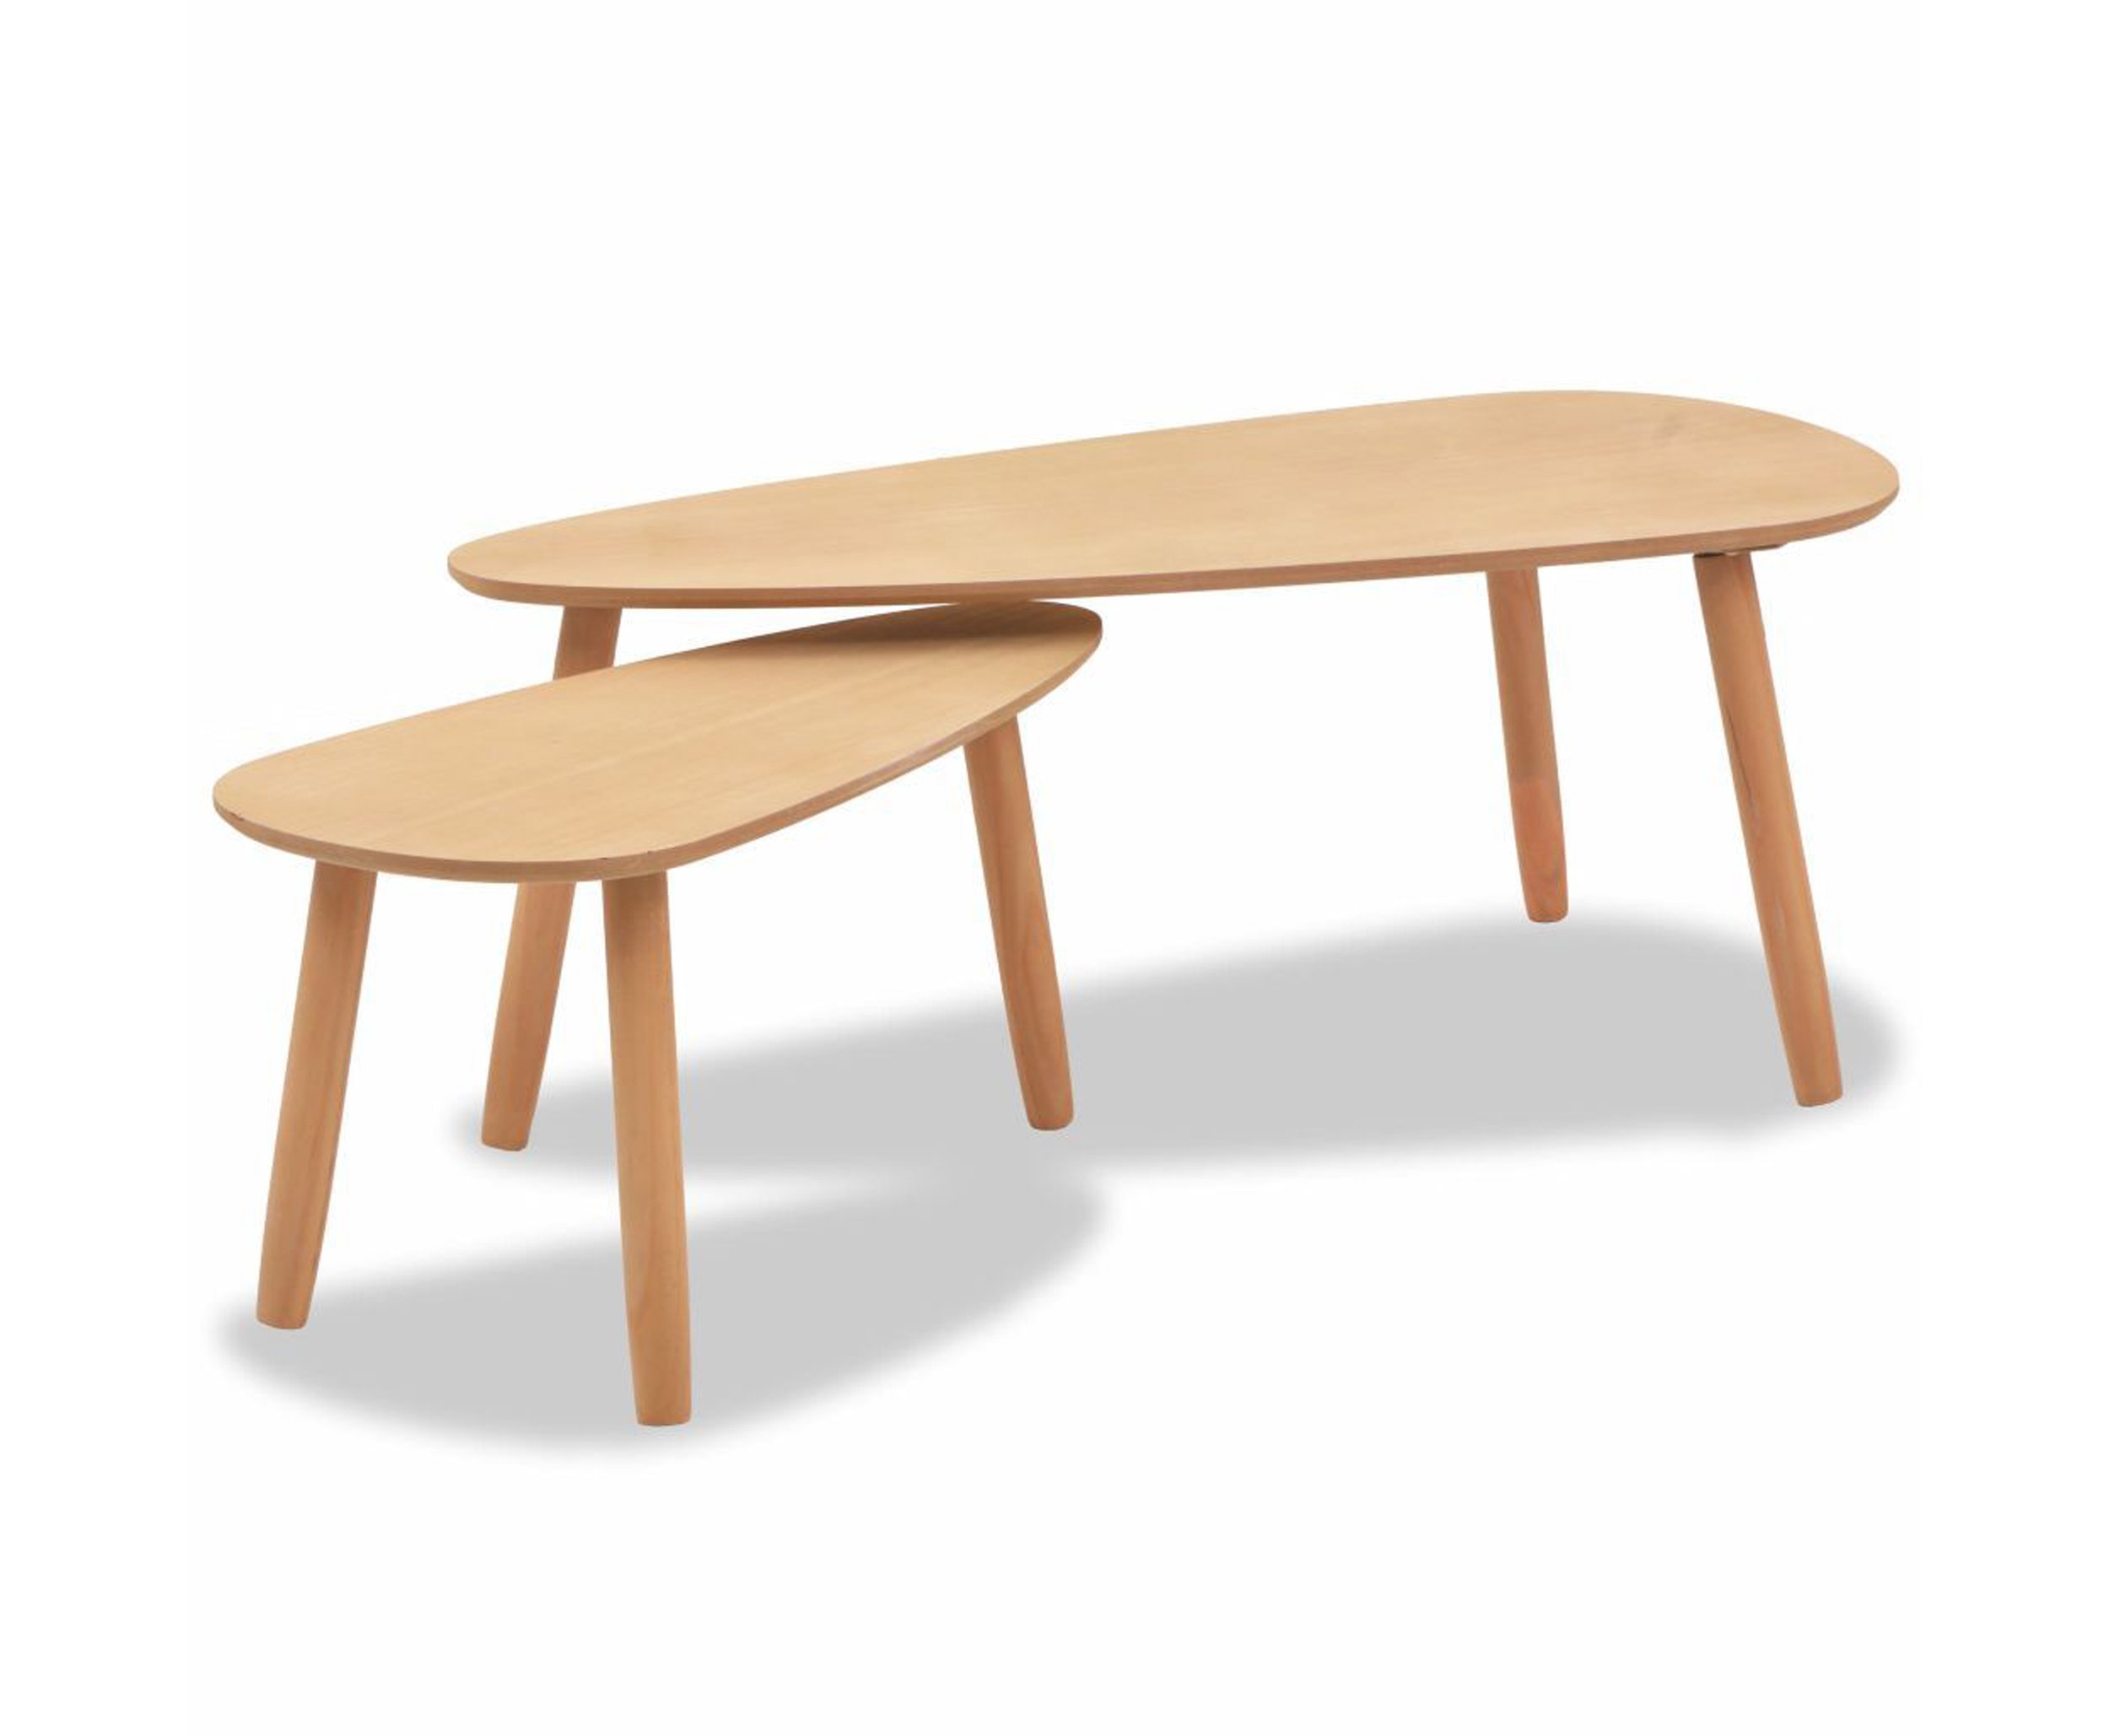 Emely Solid Wood 3 Legs Co ee Table Brown €129.66,  